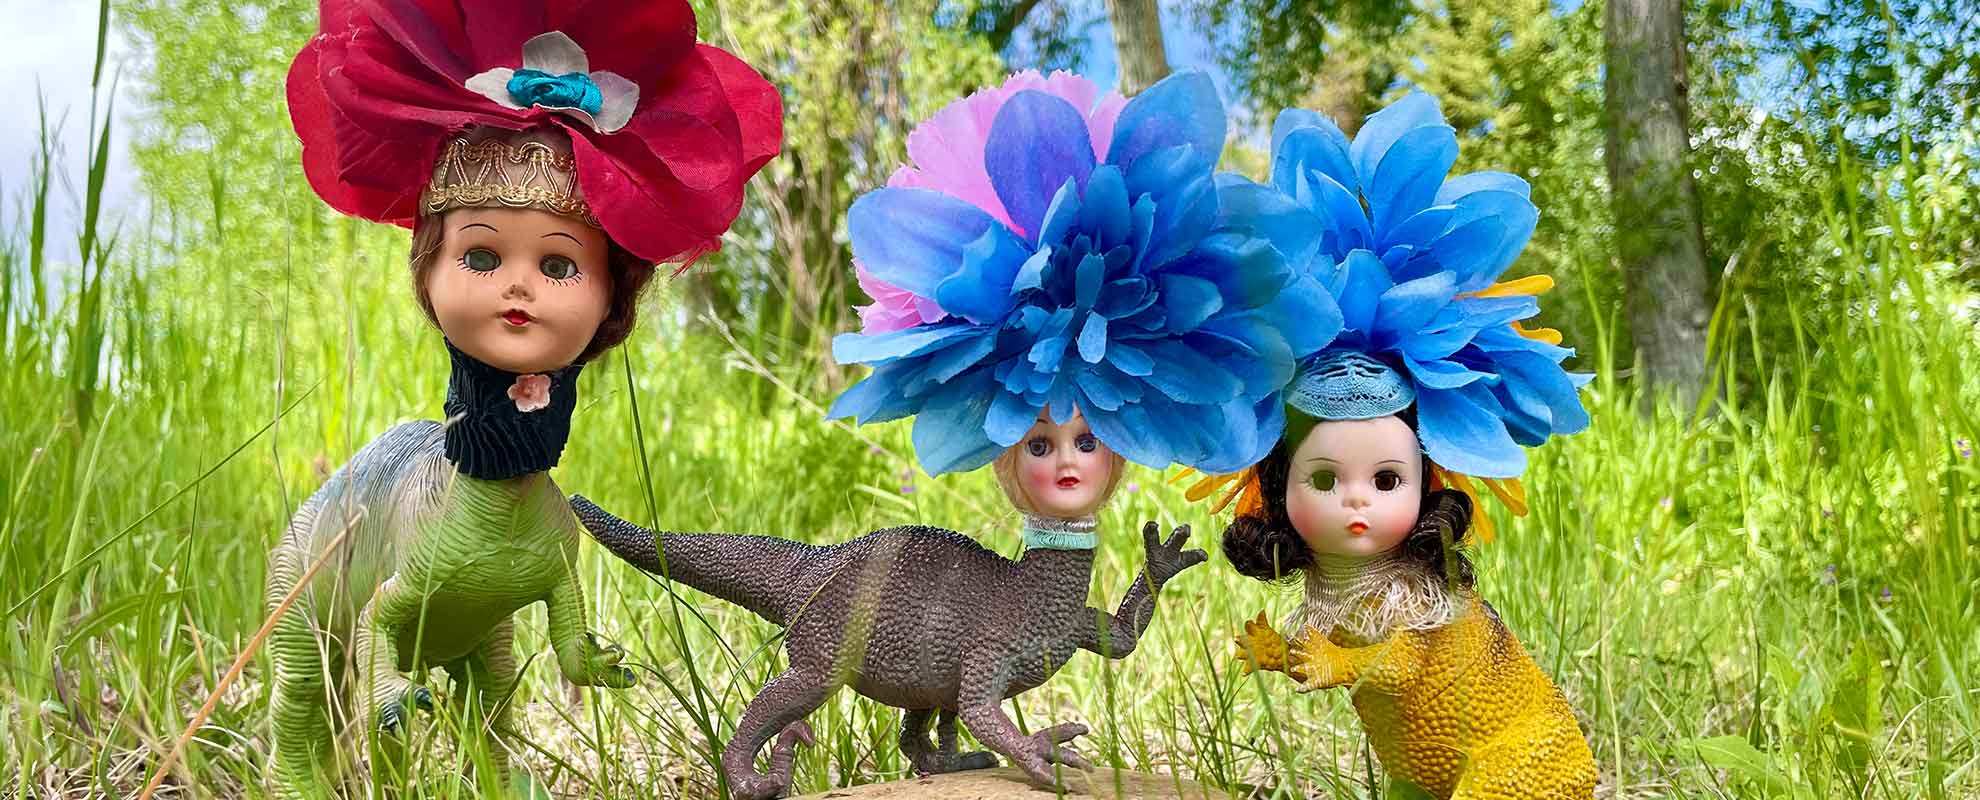 Three art dolls in a gassy field with woman doll heads with big flower headdresses and dinosaur bodies